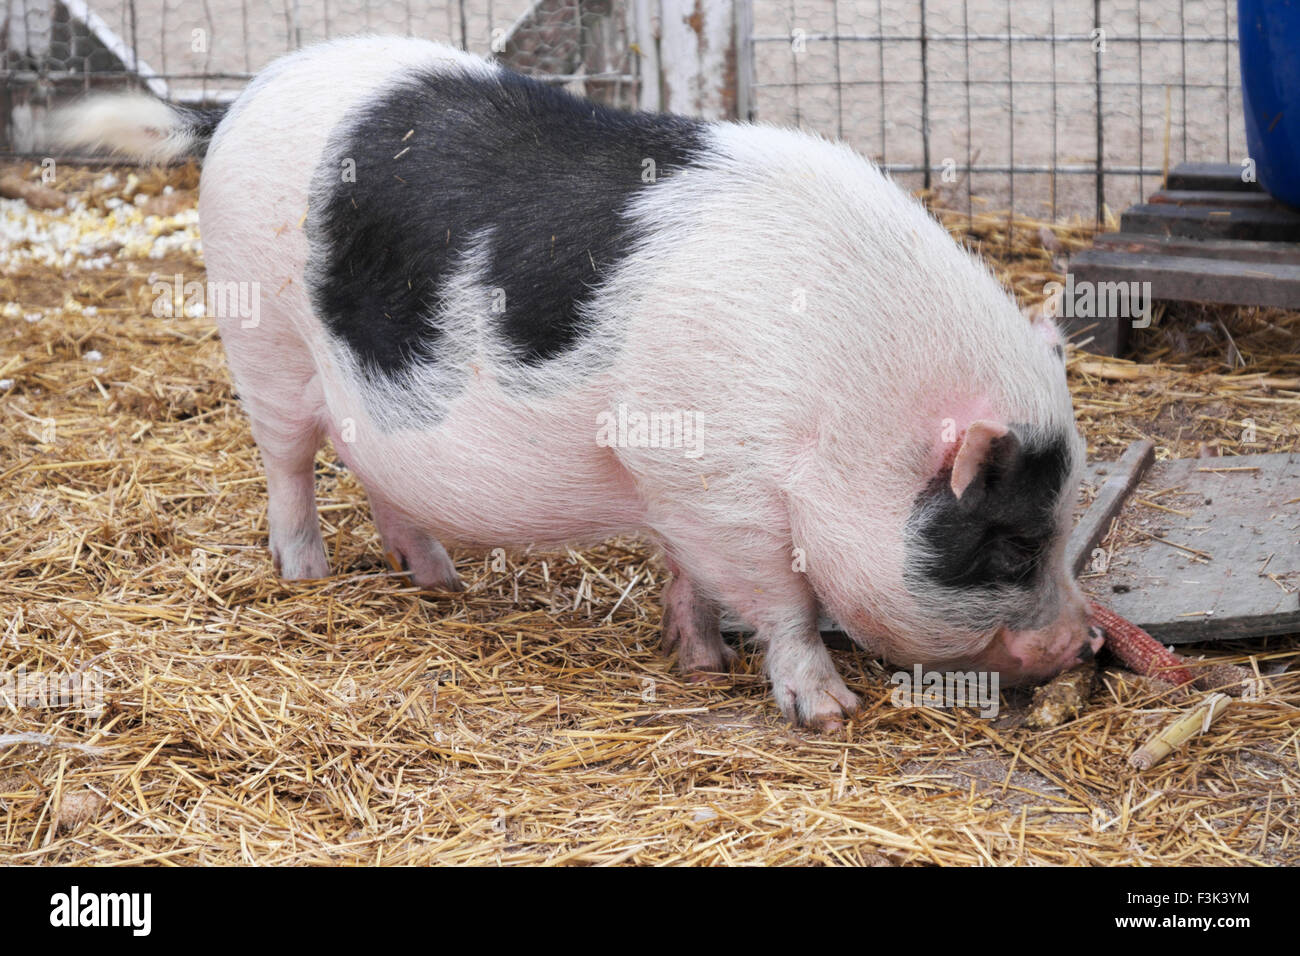 pig eating corn in its pen on a farm in northern Illinois, Illinois. Stock Photo